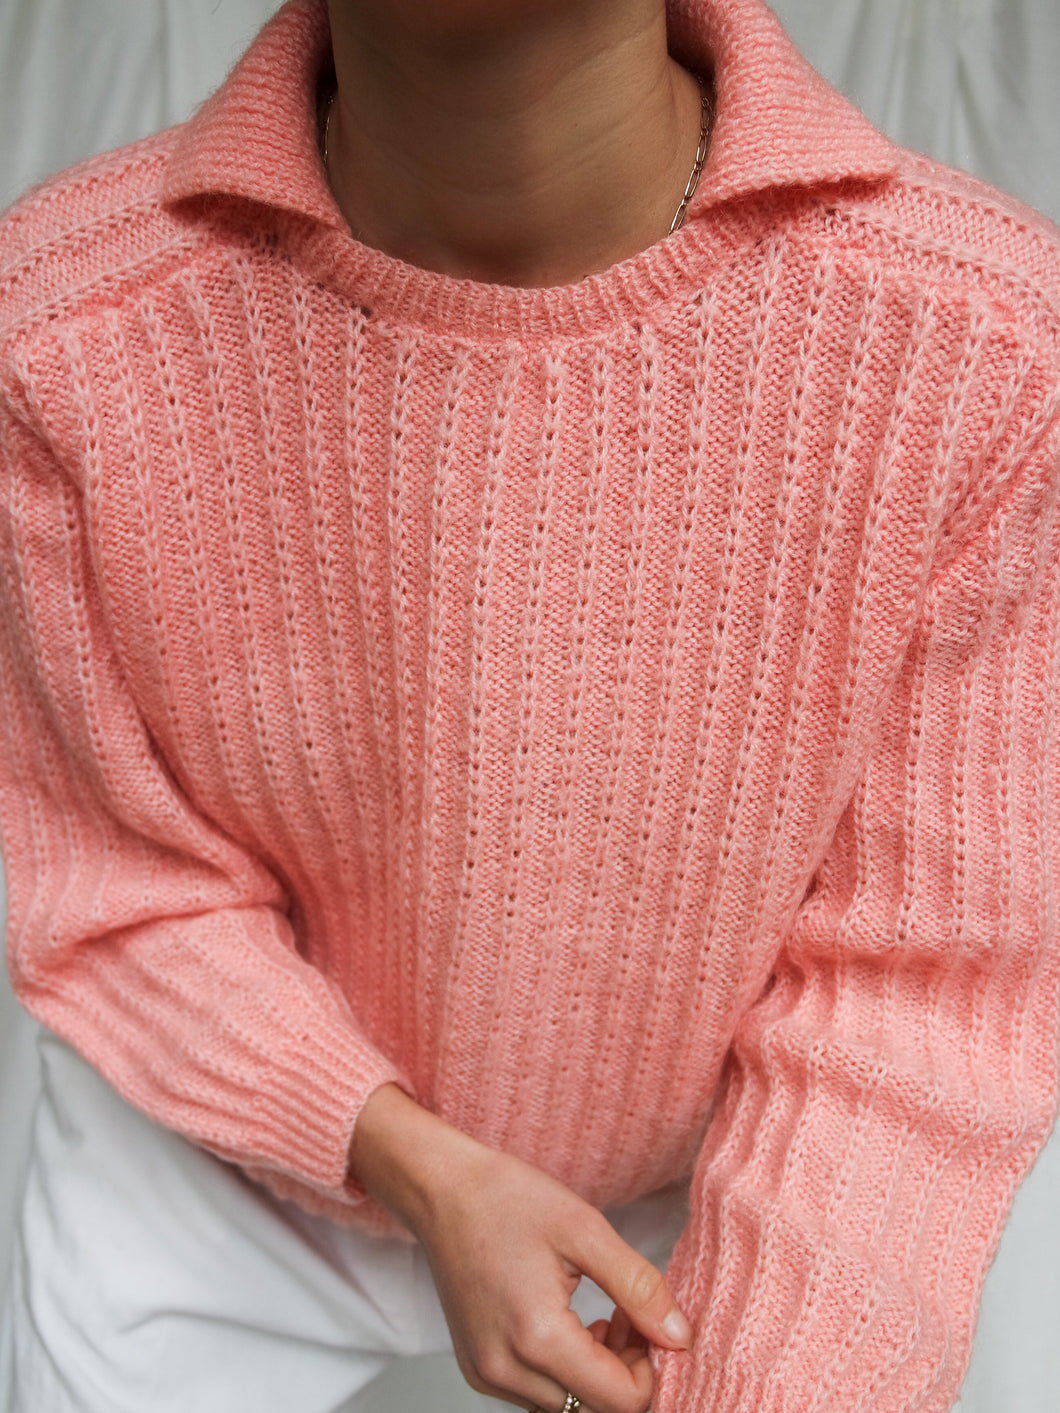 Coral knitted jumper